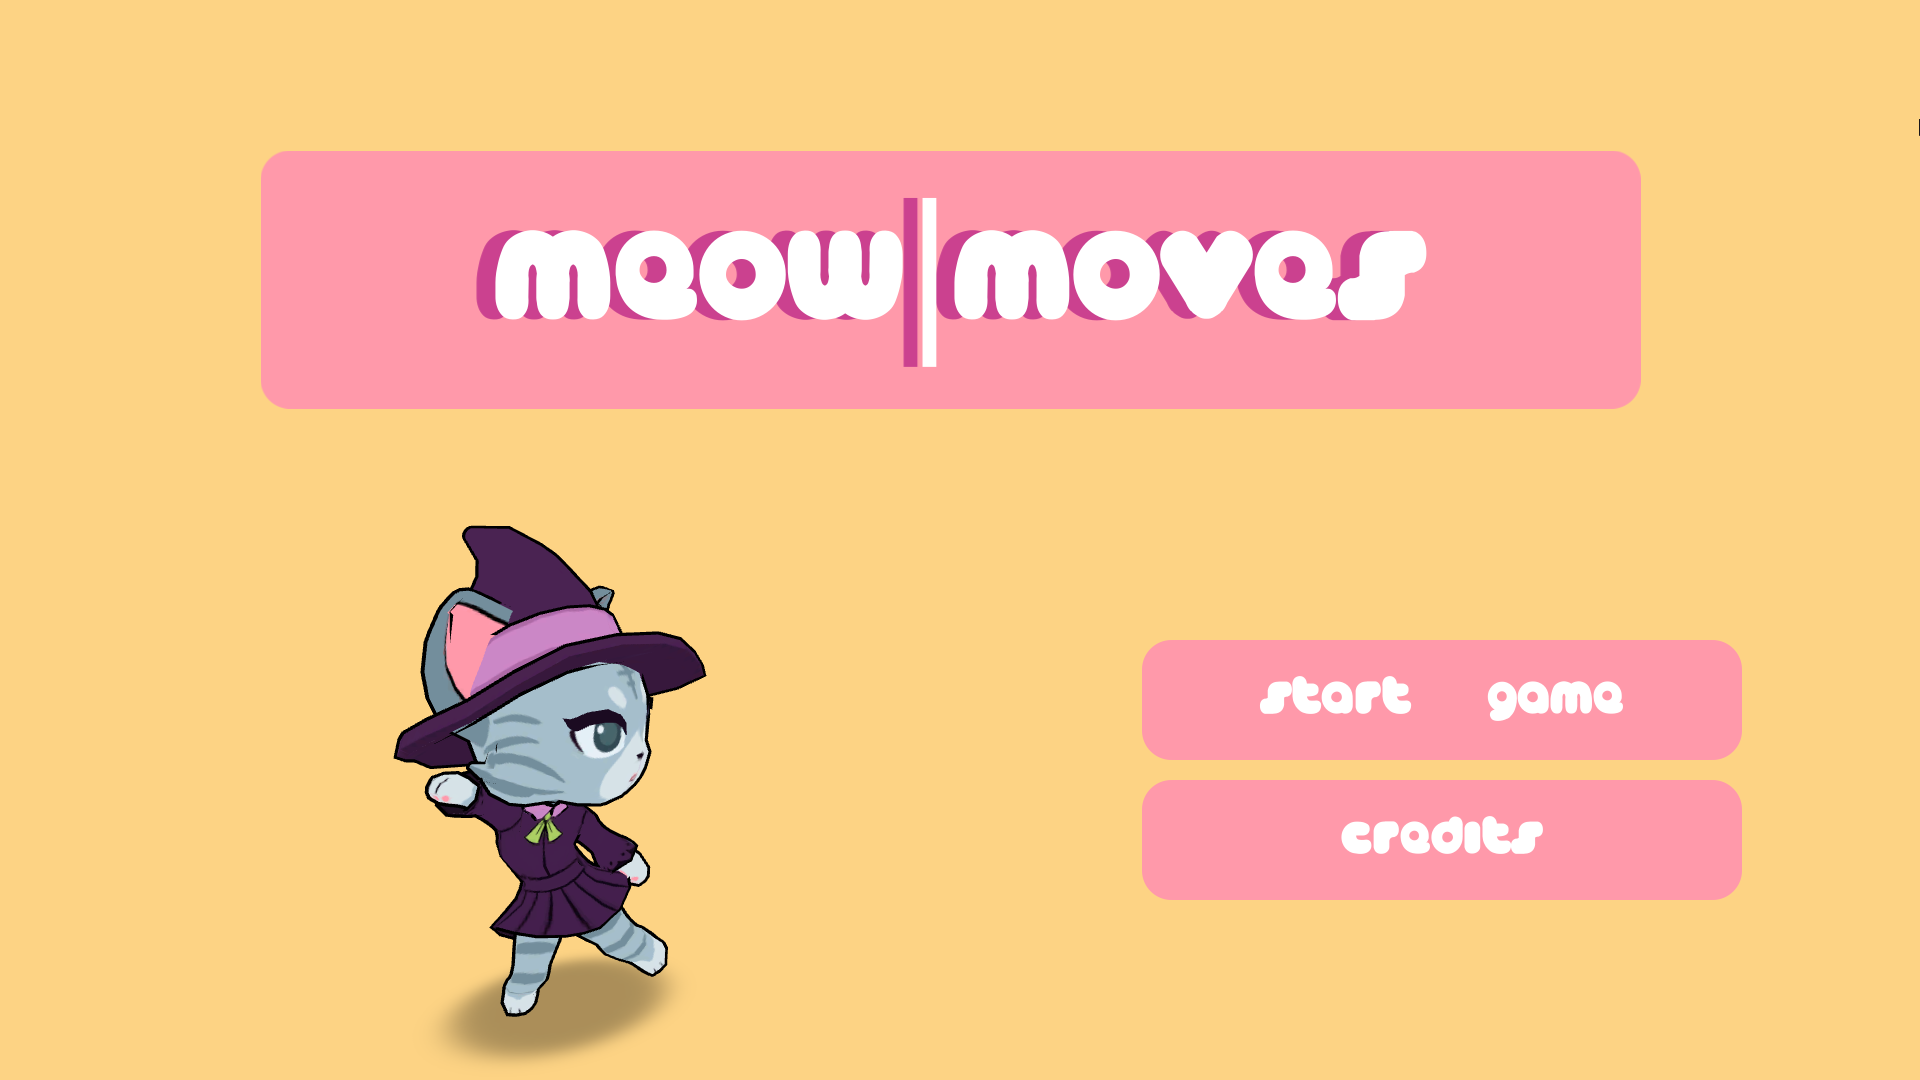 MeowMoves_2018-08-13_21-26-37.png